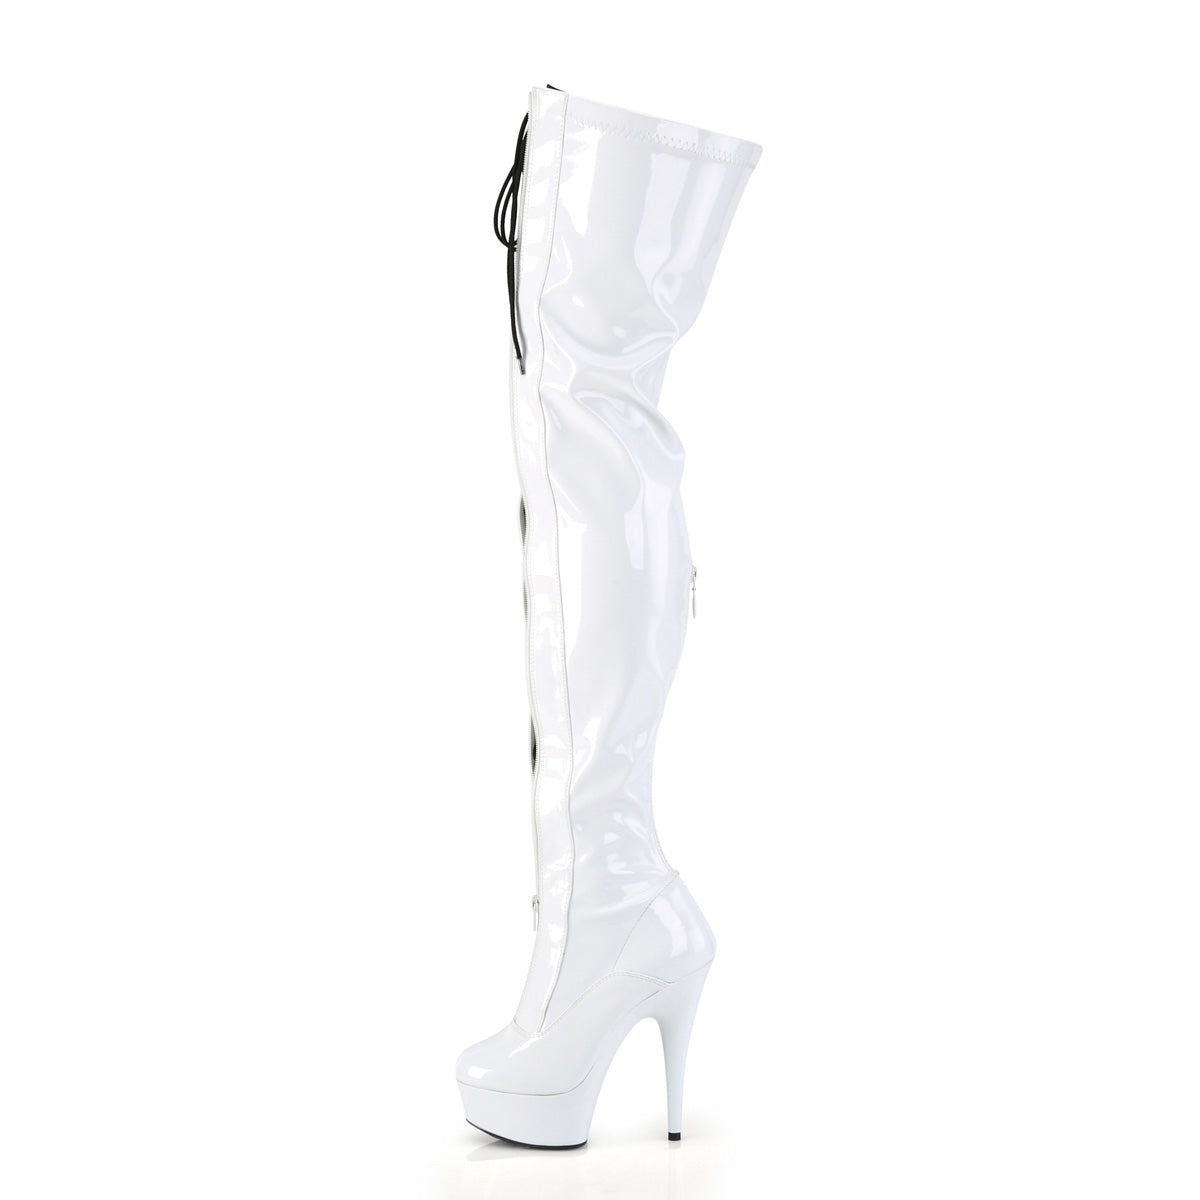 DELIGHT-3027 Pleaser Thigh High Boots Wht-Black Str. Pat/White Platforms (Exotic Dancing)